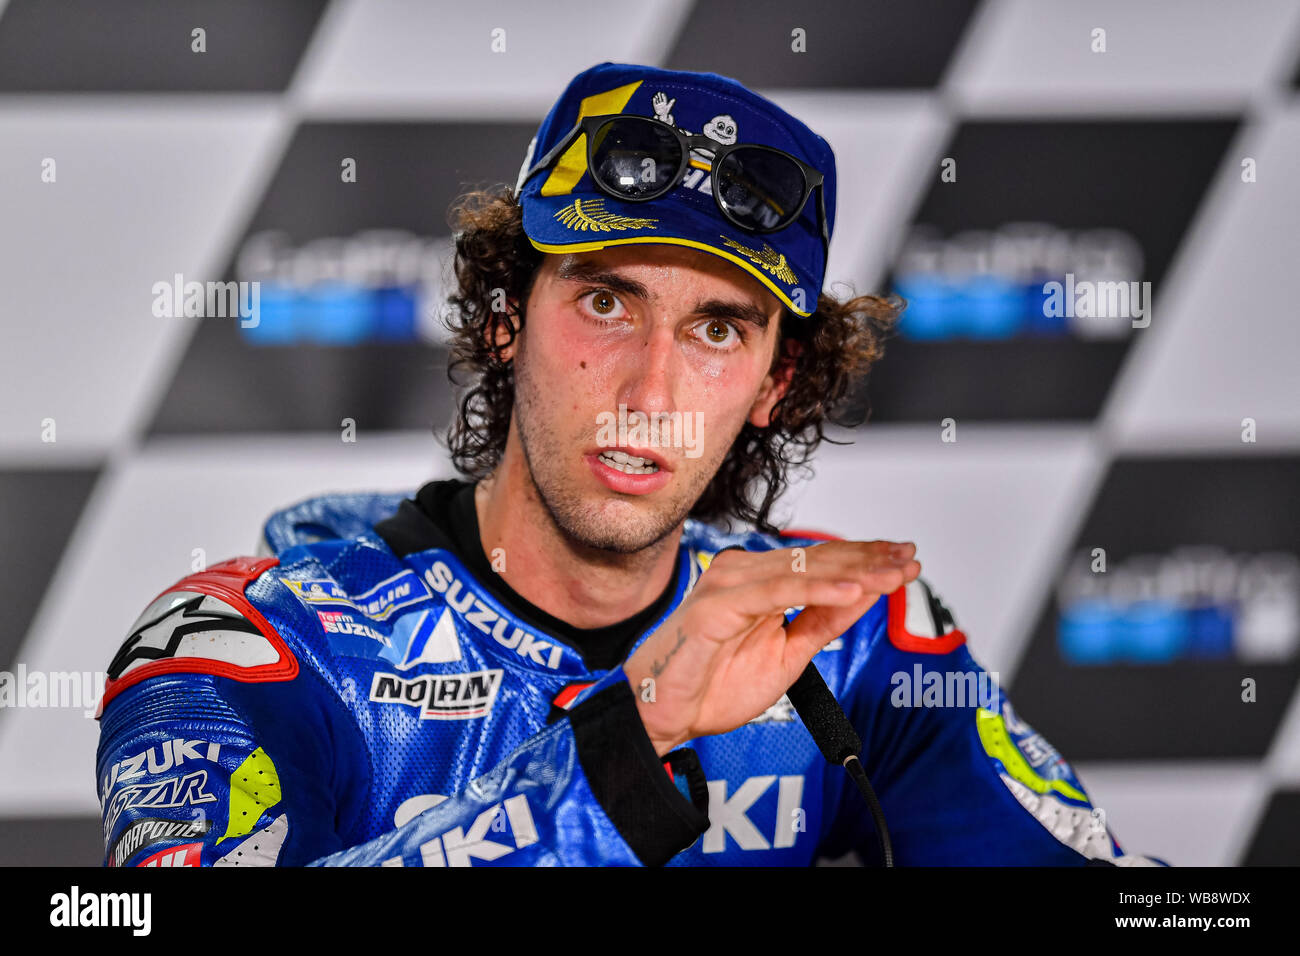 Towcester, UK. 25th Aug, 2019.  25th Aug, 2019. Alex Rins (SPA) of Team SUZUKI ECSTAR at Press Conference after Sunday’s Race of  GoPro British Grand Prix at Silverstone Circuit on Sunday, August 25, 2019 in TOWCESTER, ENGLAND. Credit: Taka G Wu/Alamy Live News Stock Photo